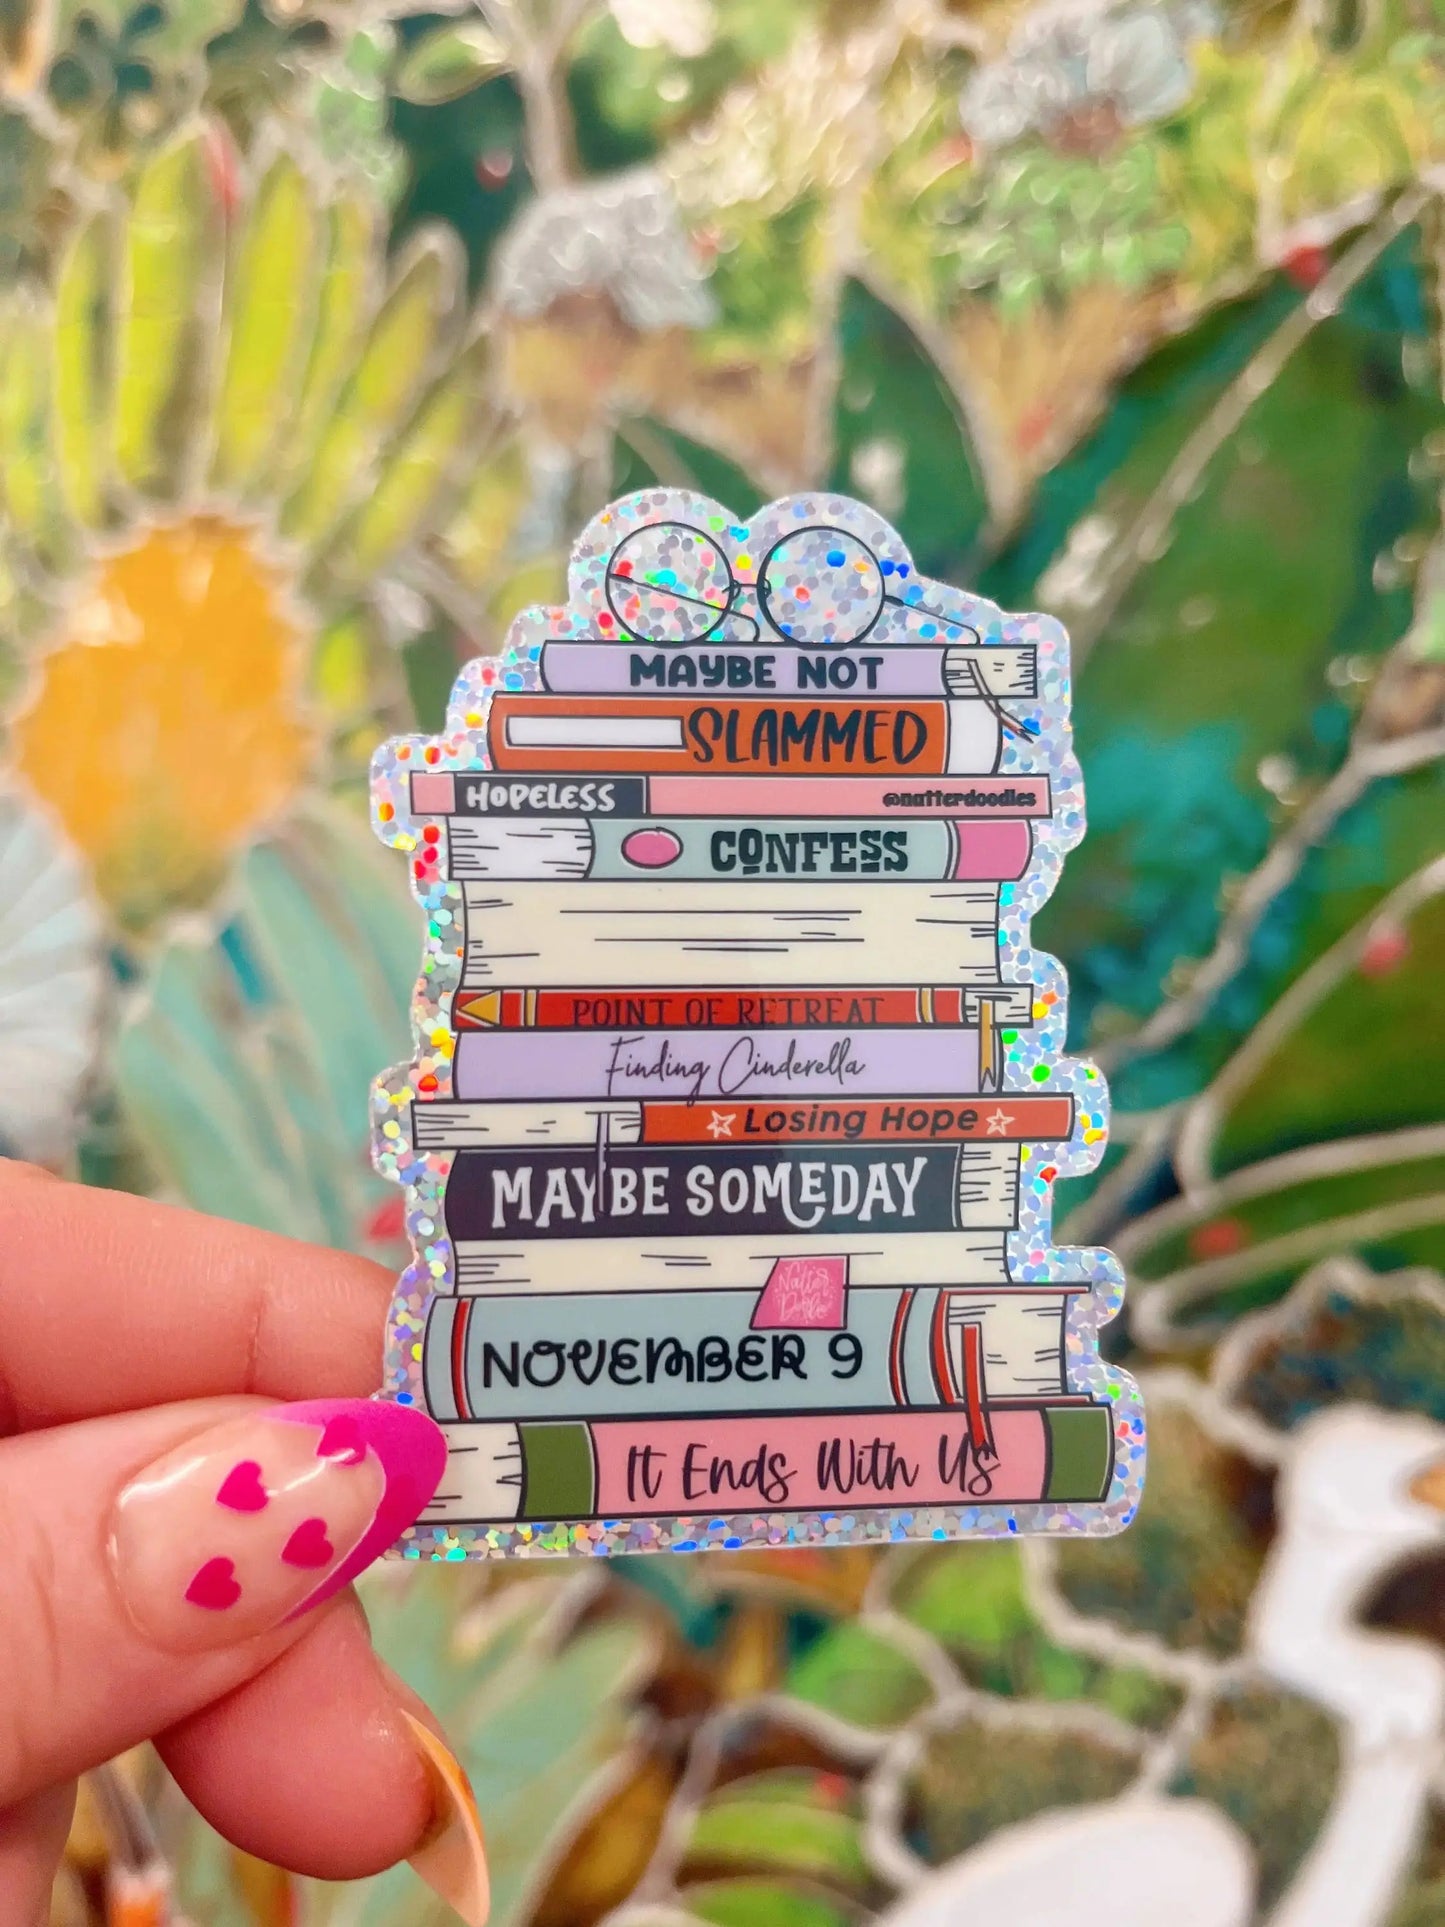 Colleen Hoover Book Stack Sticker - It Ends With Us